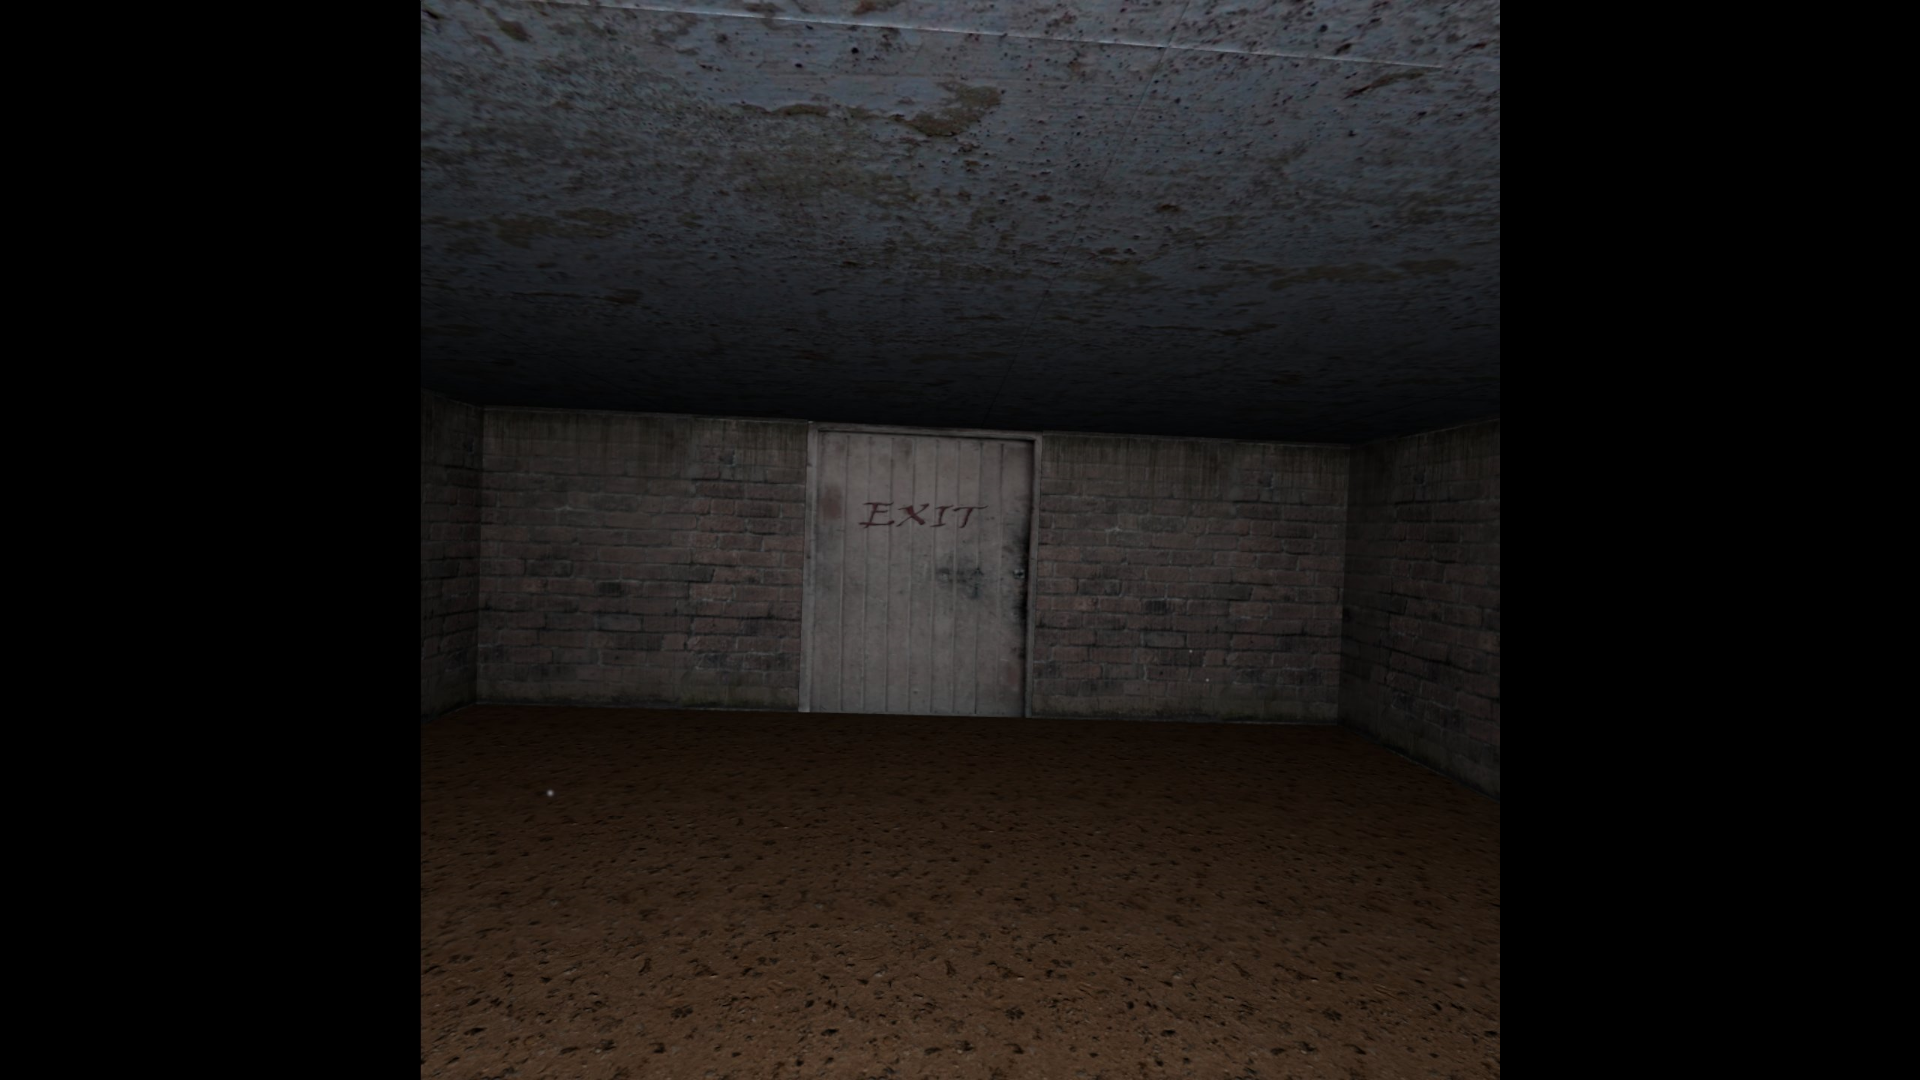 Slendrina: The Cellar – Download & Play for Free Here